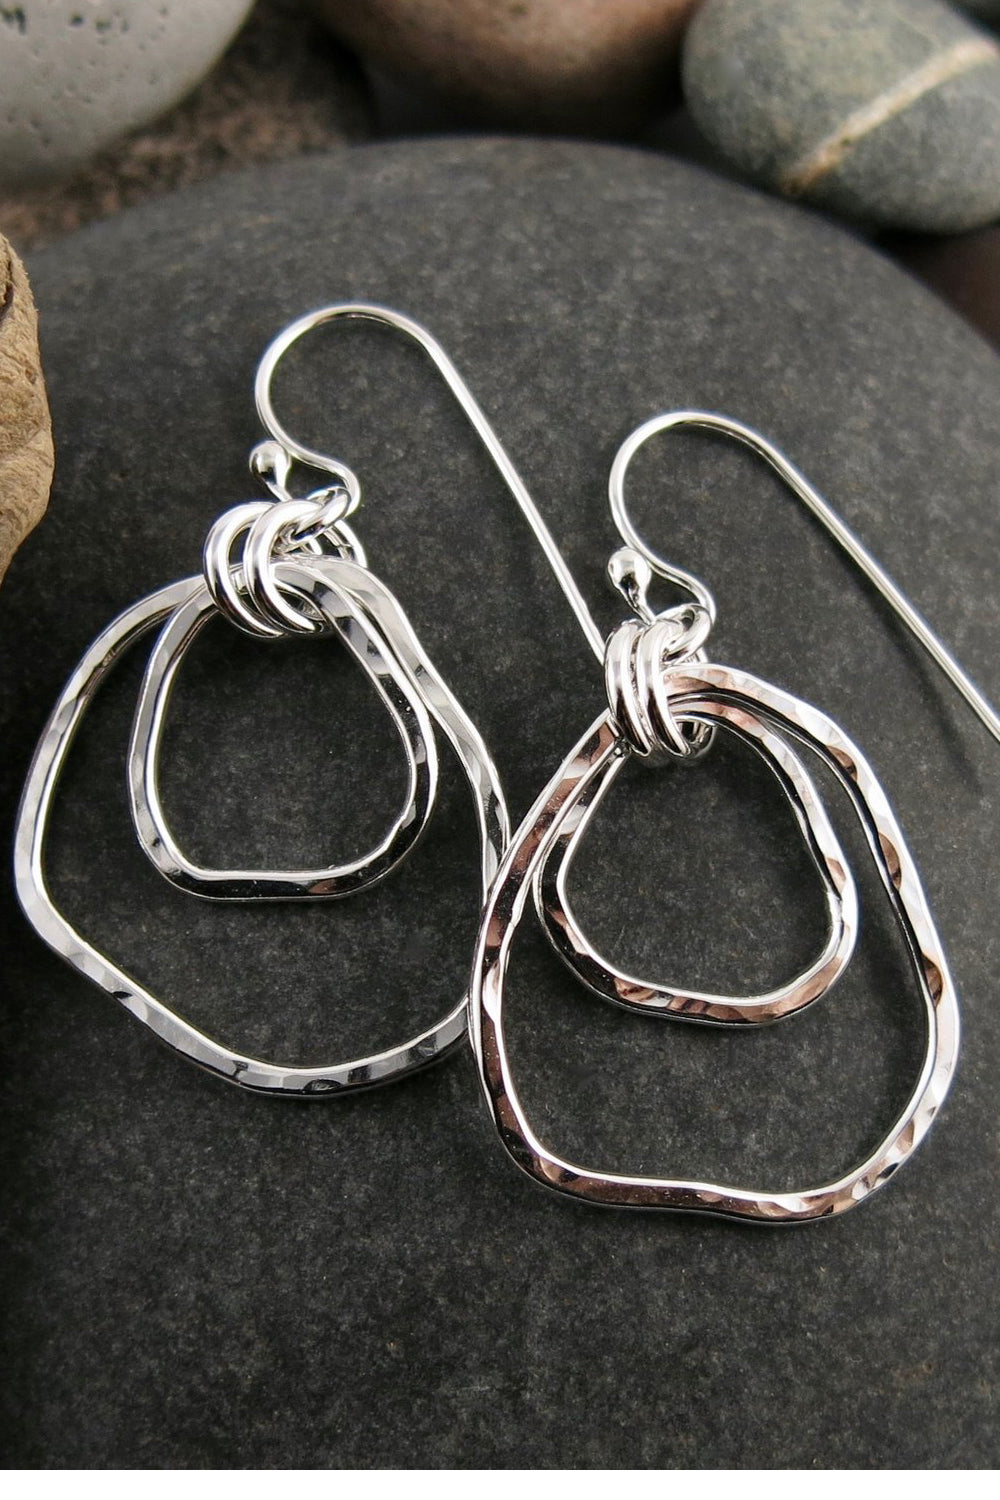 Coast Duo Earrings • Hammer Textured Free Form Sterling Silver Dangles